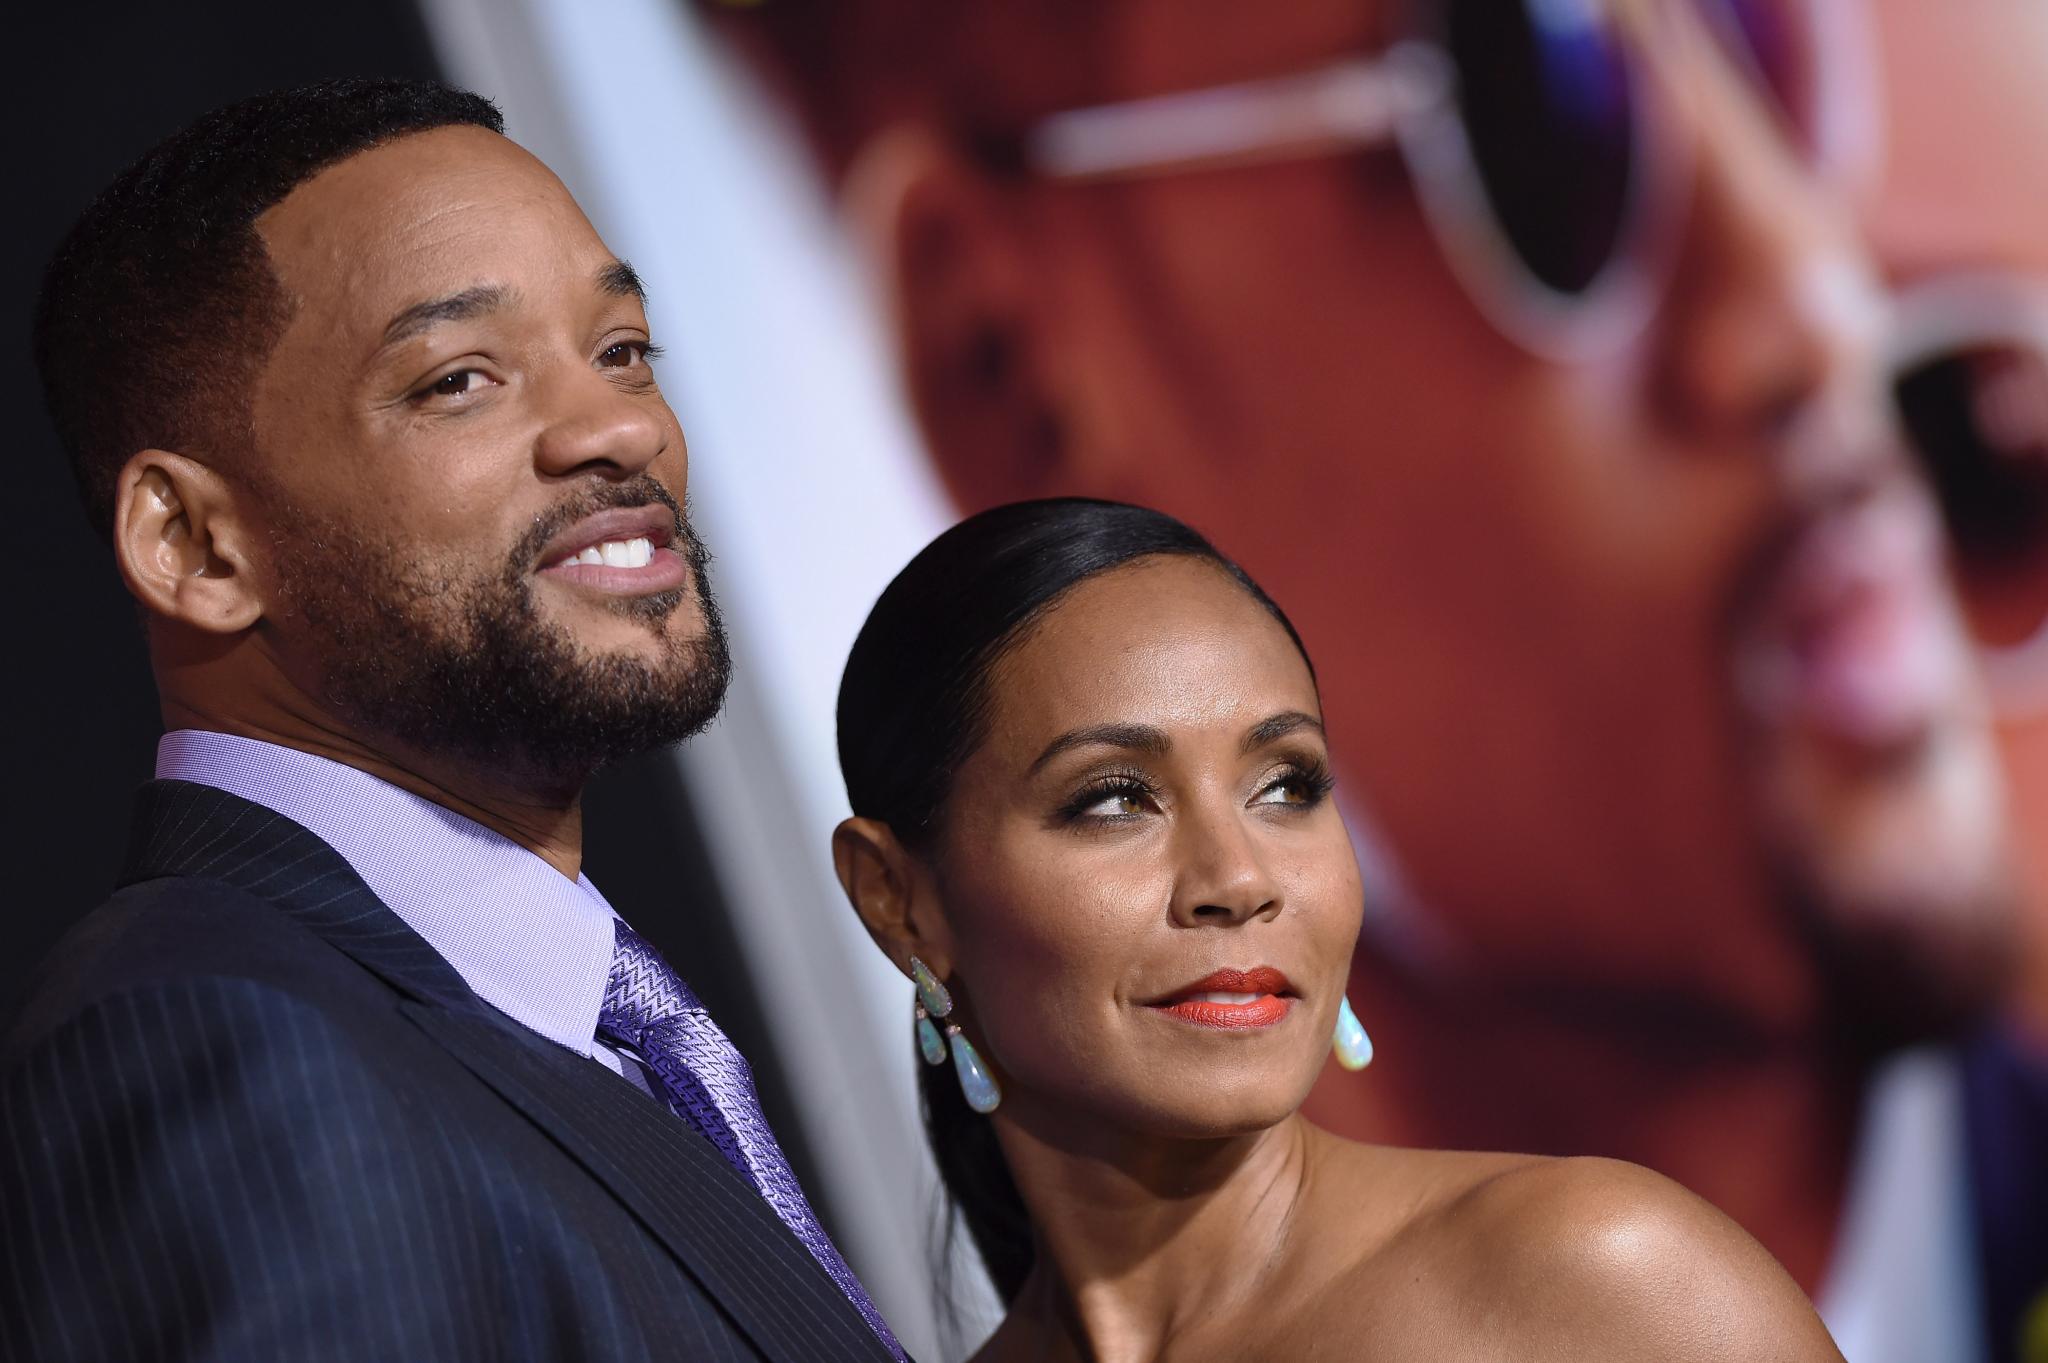 Jada Wishes Will Smith a Very Happy Birthday, Thanks Him for Helping Her Change the World
